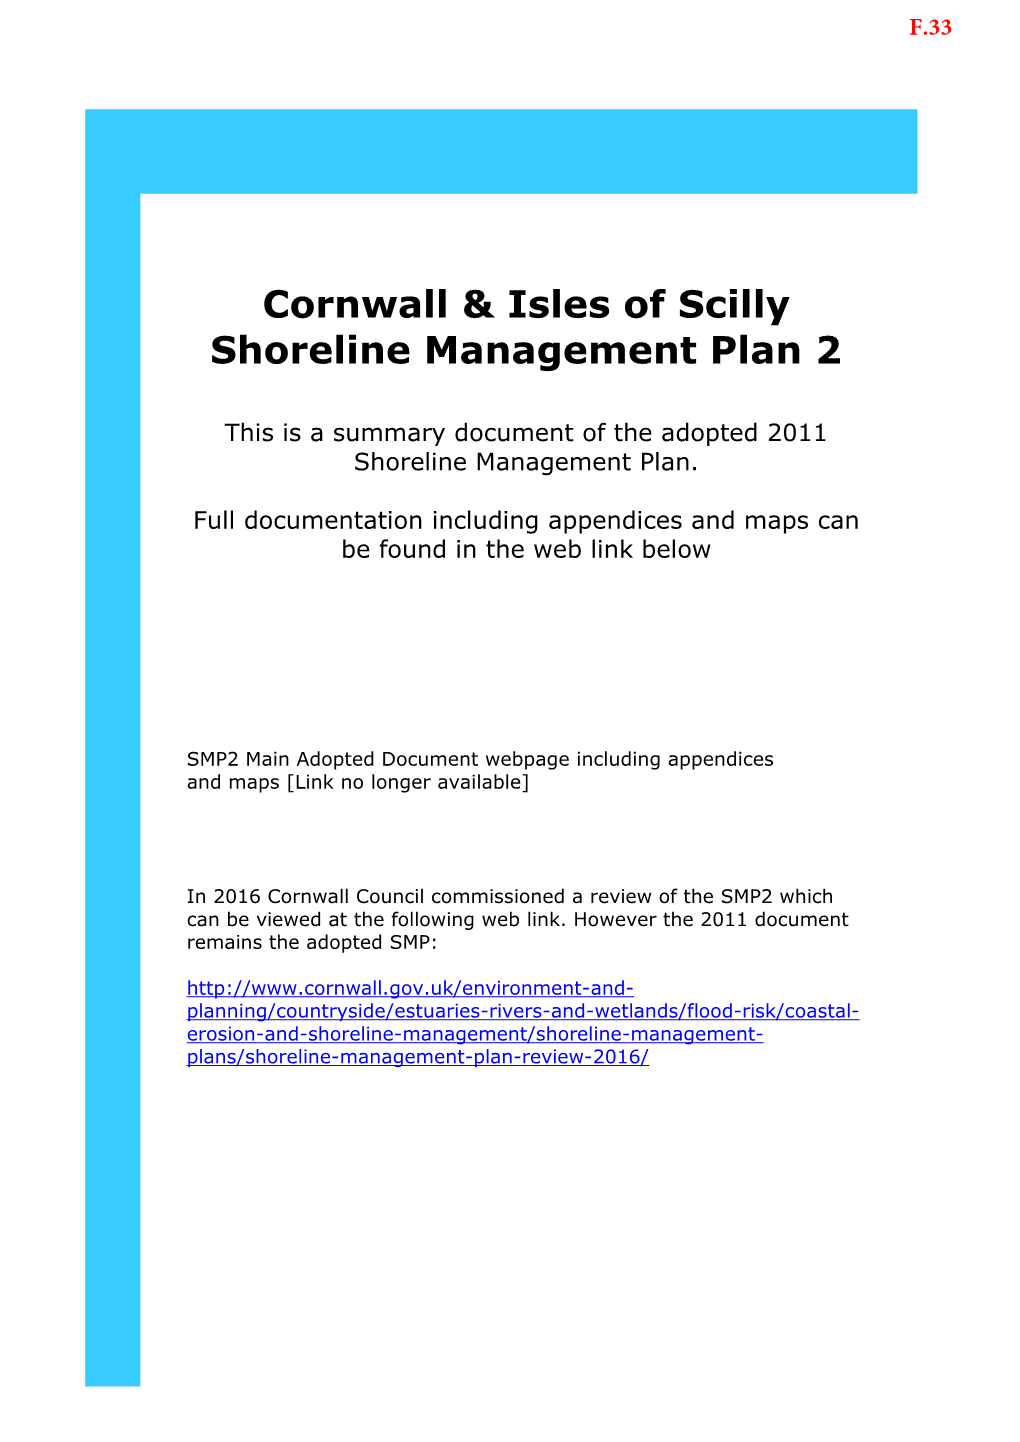 Cornwall & Isles of Scilly Shoreline Management Plan 2